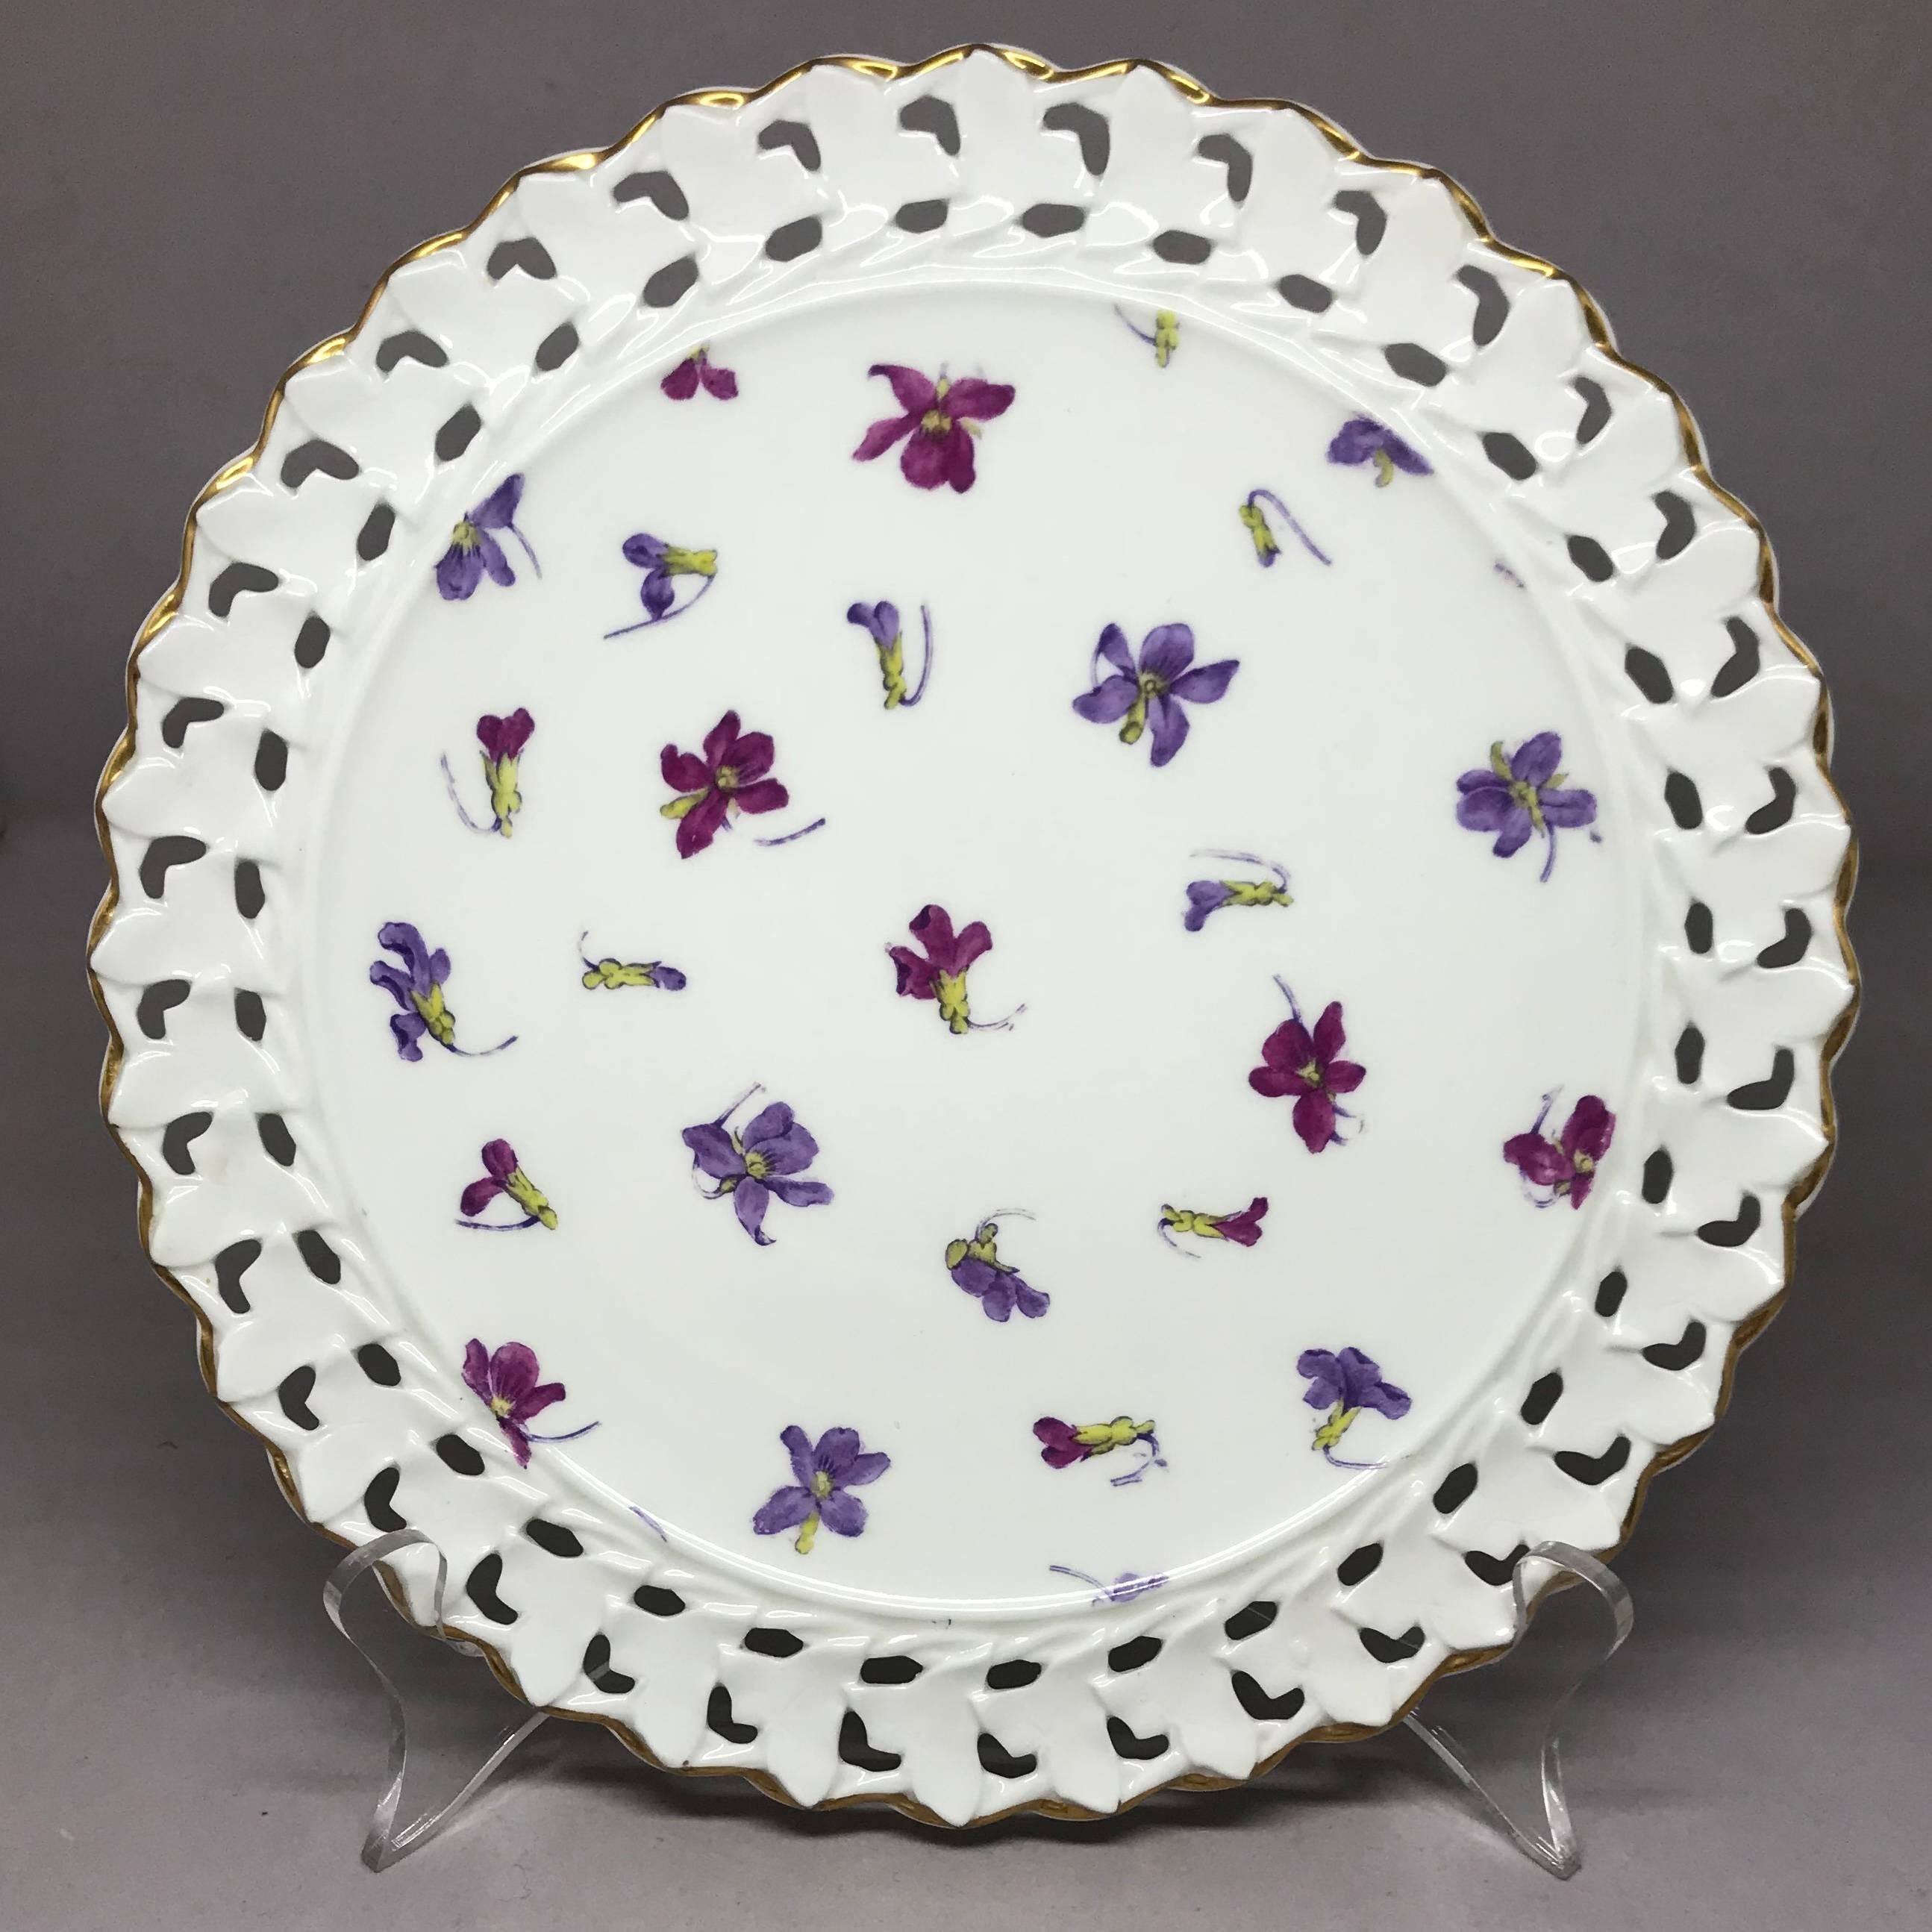 Set of six pink and purple floral gilt plates. Six white plates decorated with purple and magenta floral sprays bordered in reticulated gold rims.  Marks for Cauldon. England, early 20th century.
Dimensions: 9.5